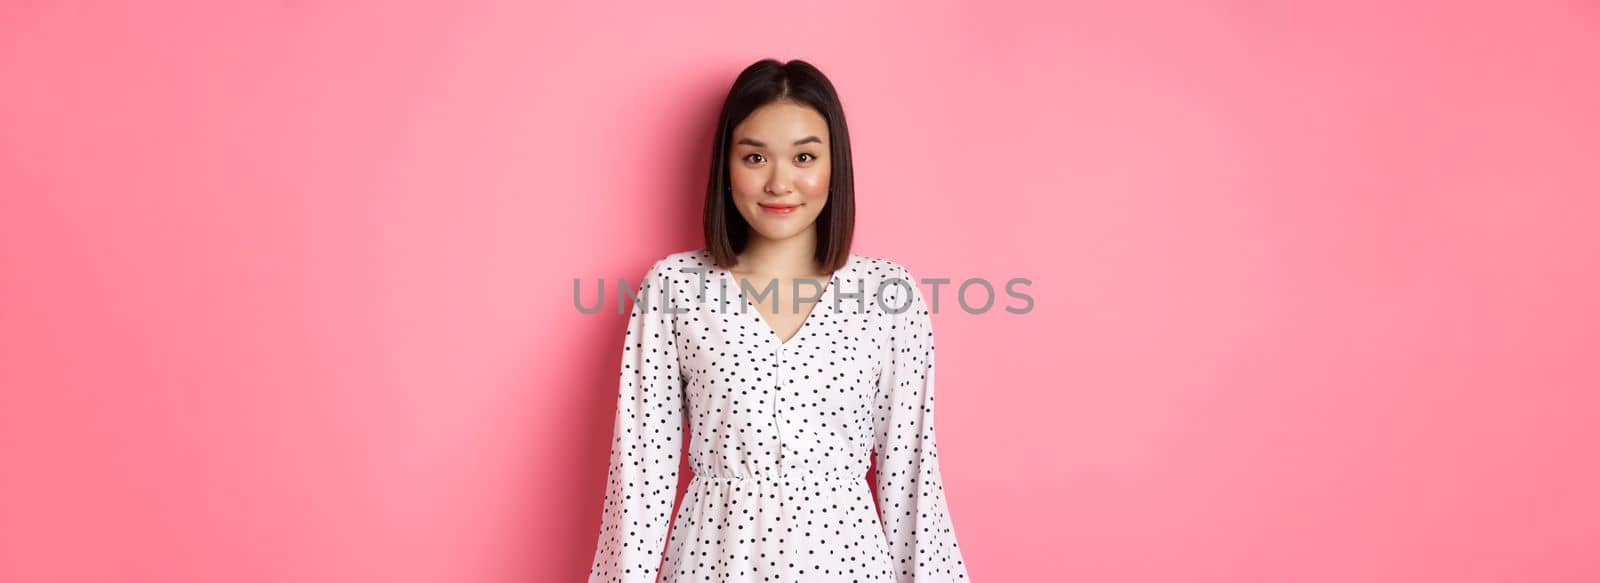 Beautiful asian lady smiling at camera, wearing cute romantic dress, standing over pink background. Copy space